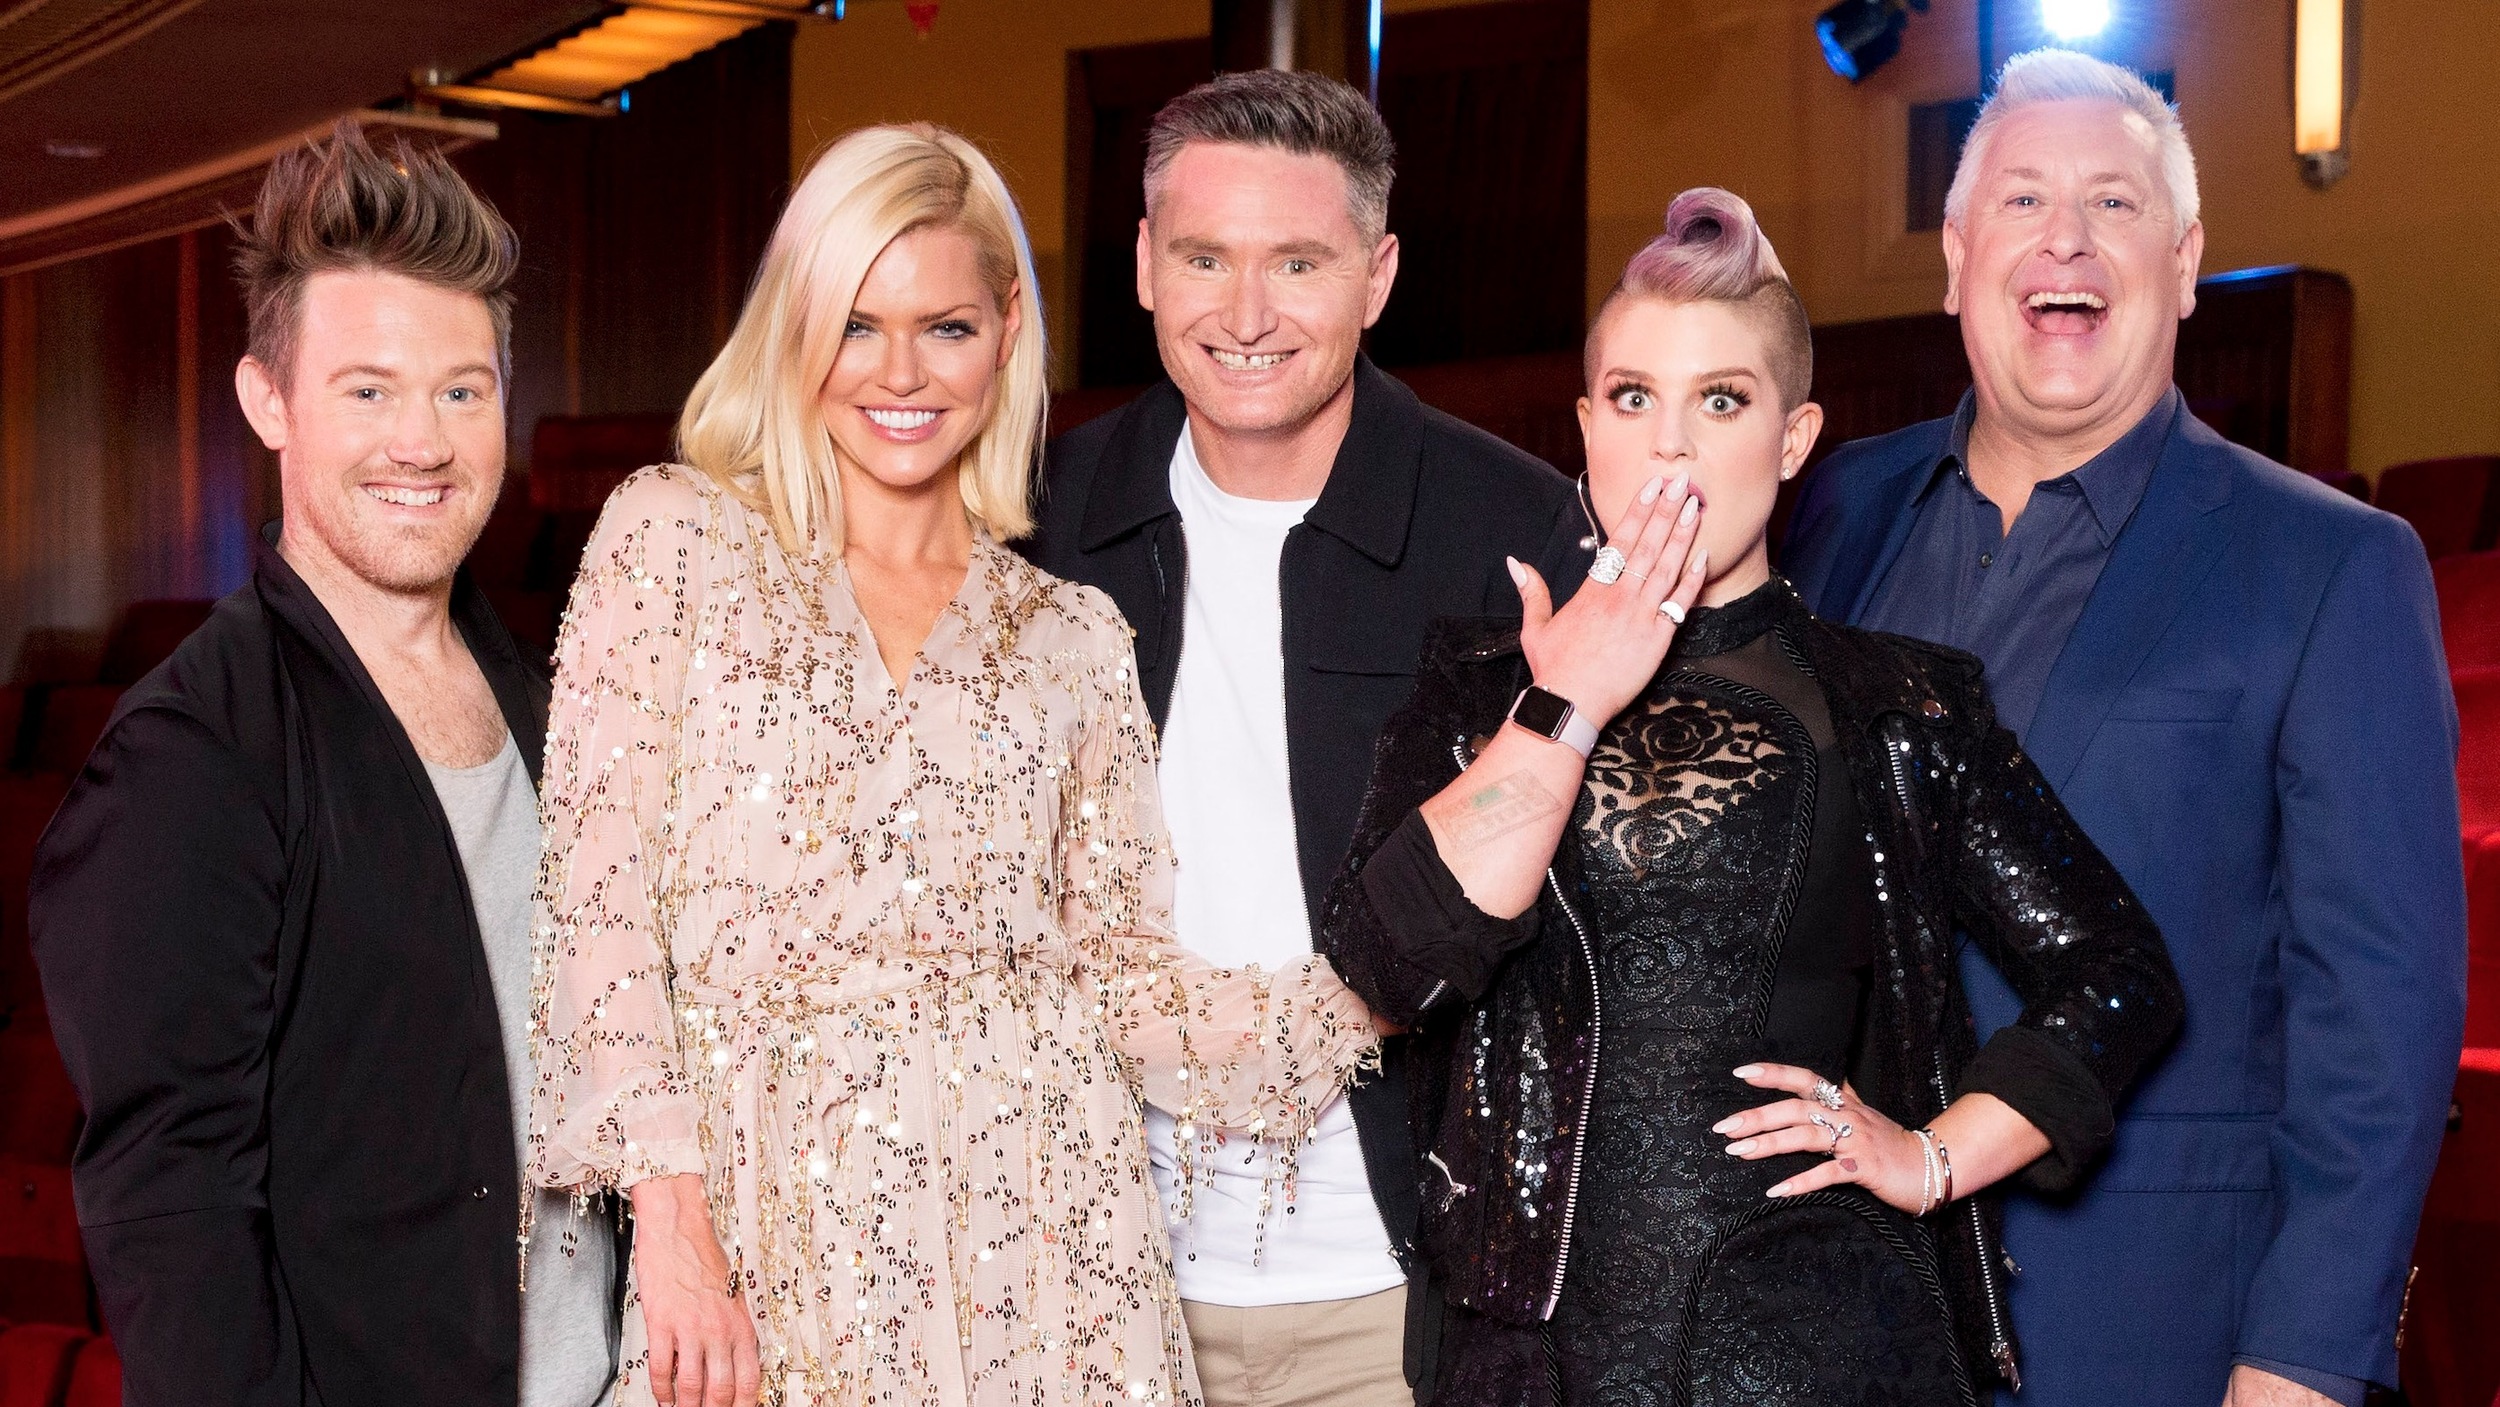   Eddie Perfect, Sophie Monk, Dave Hughes, Kelly Osbourne and Ian “Dicko” Dickson.  image - supplied/Nine Network 